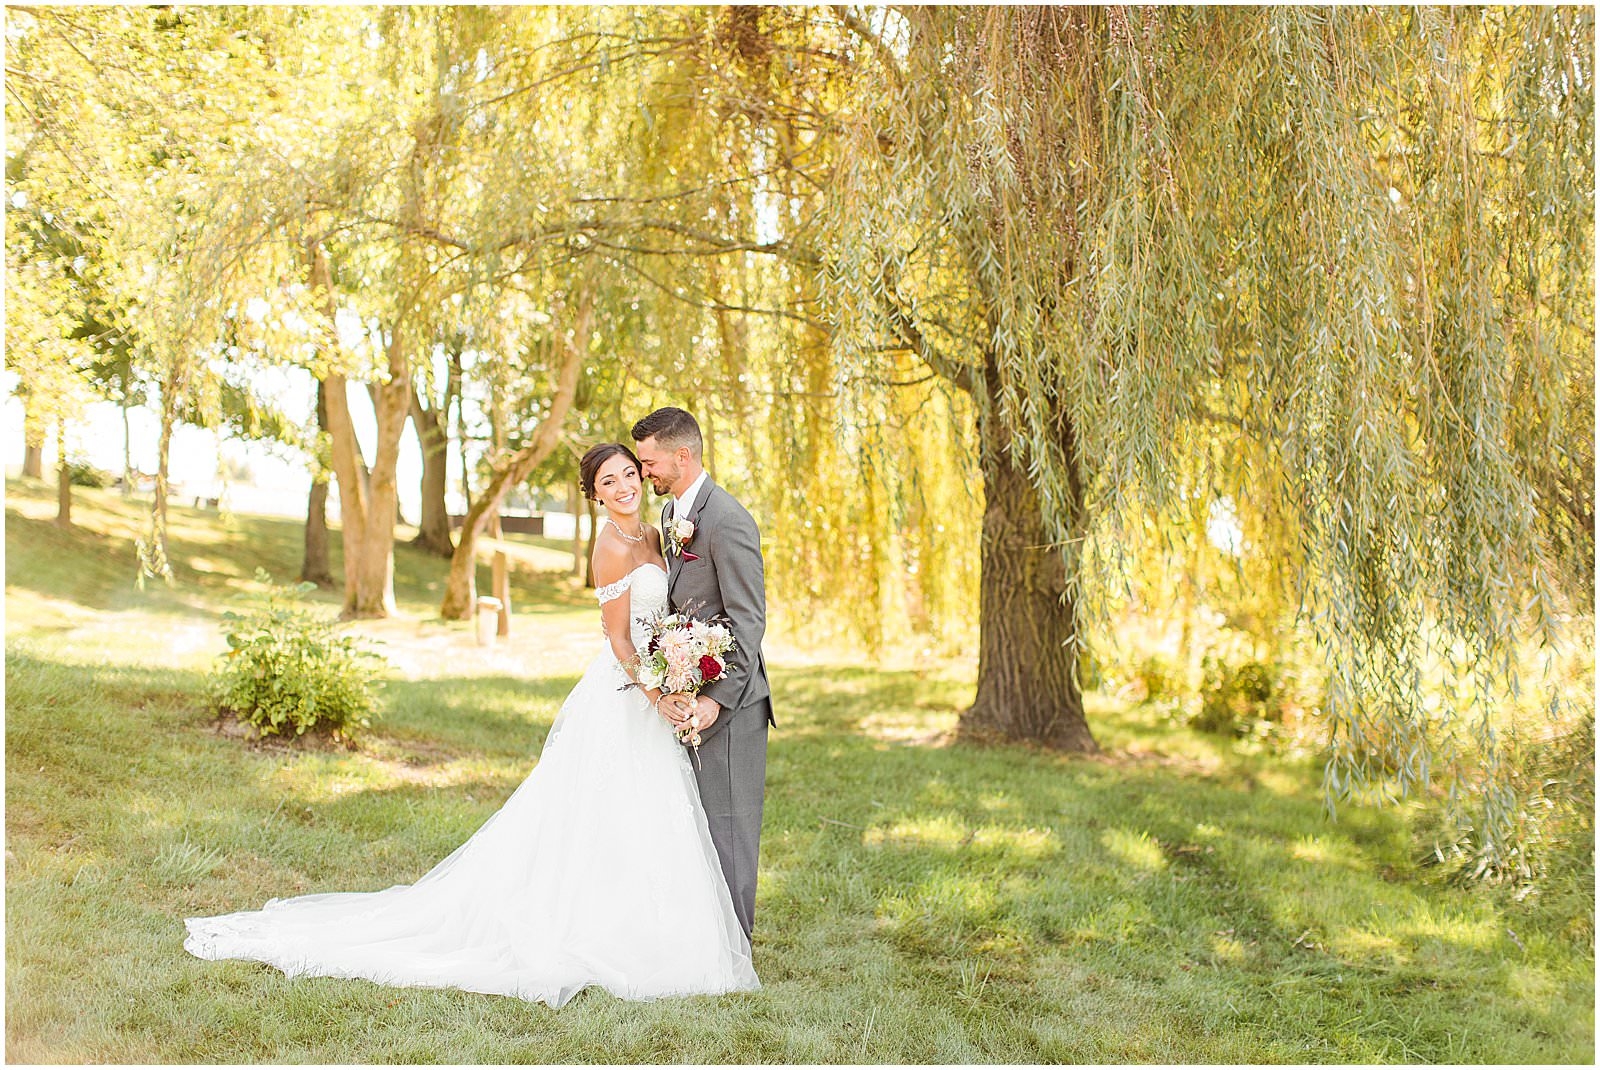 A Stunning Fall Wedding in Indianapolis, IN |. Sally and Andrew | Bret and Brandie Photography 0061.jpg